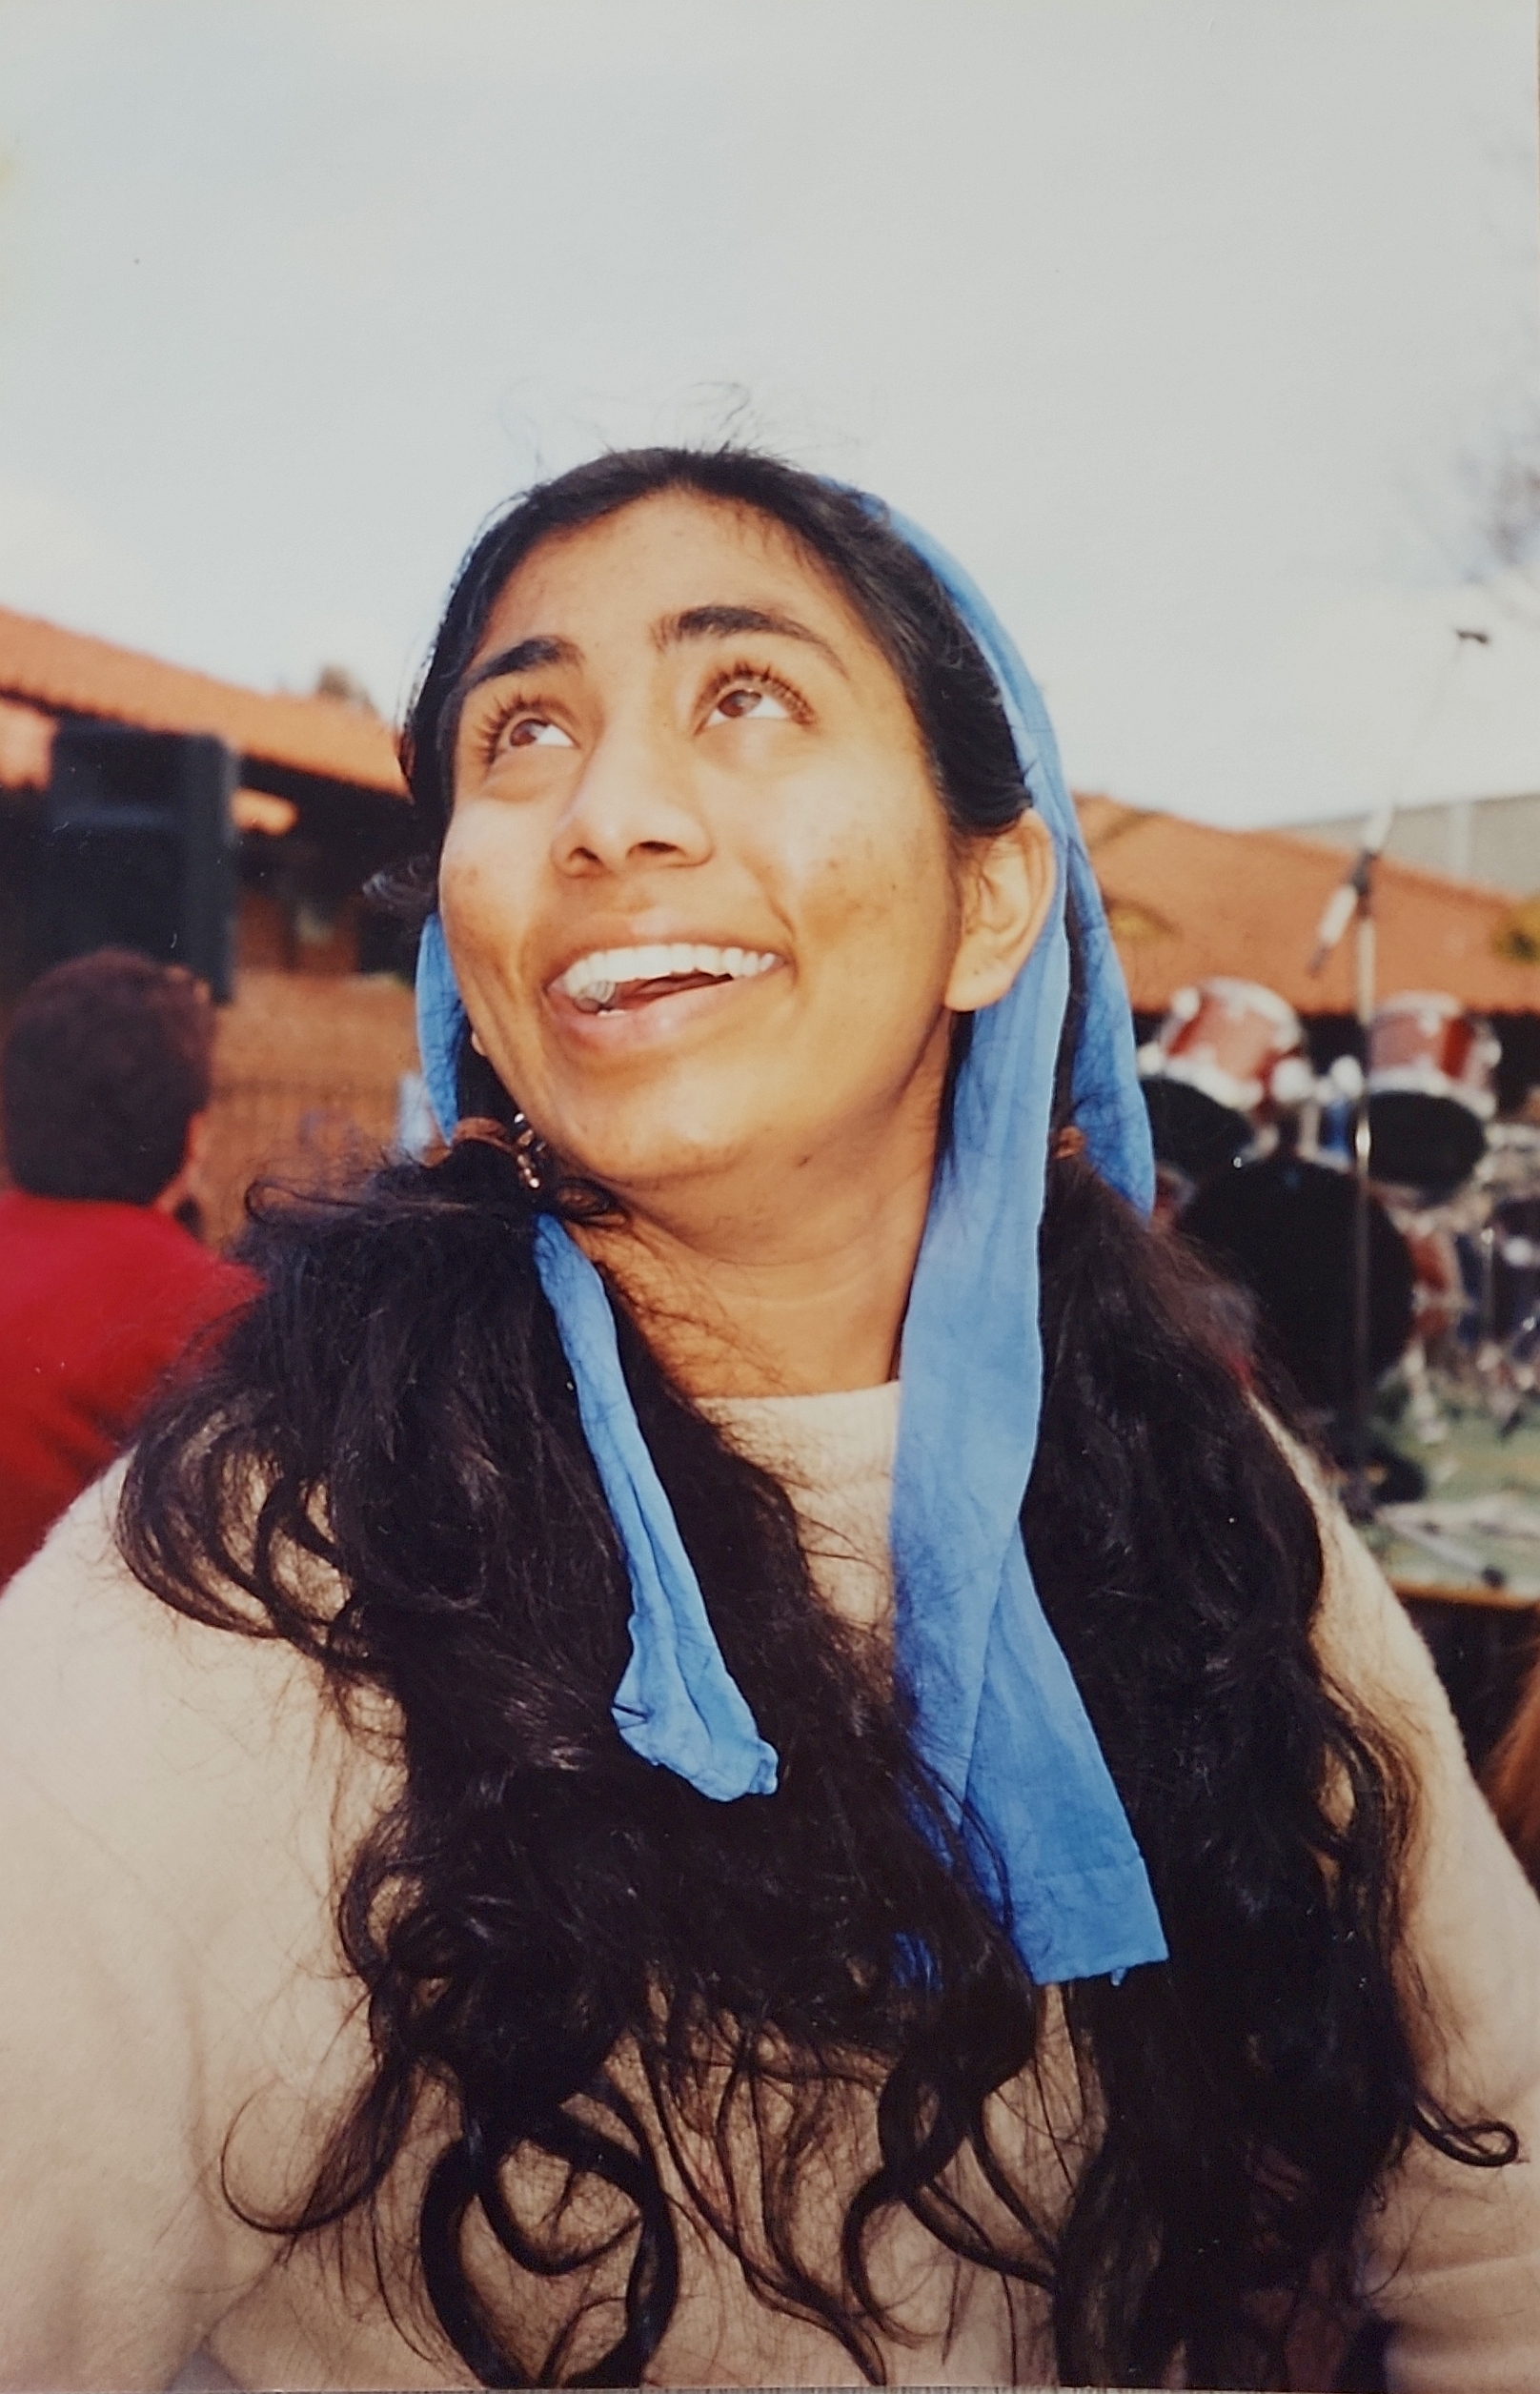 Photo shows Zaneta Mascarenhas as an engineering student on the Curtin Bentley campus in the early 2000s. Zaneta is in an outdoor courtyard smiling and looking upwards.